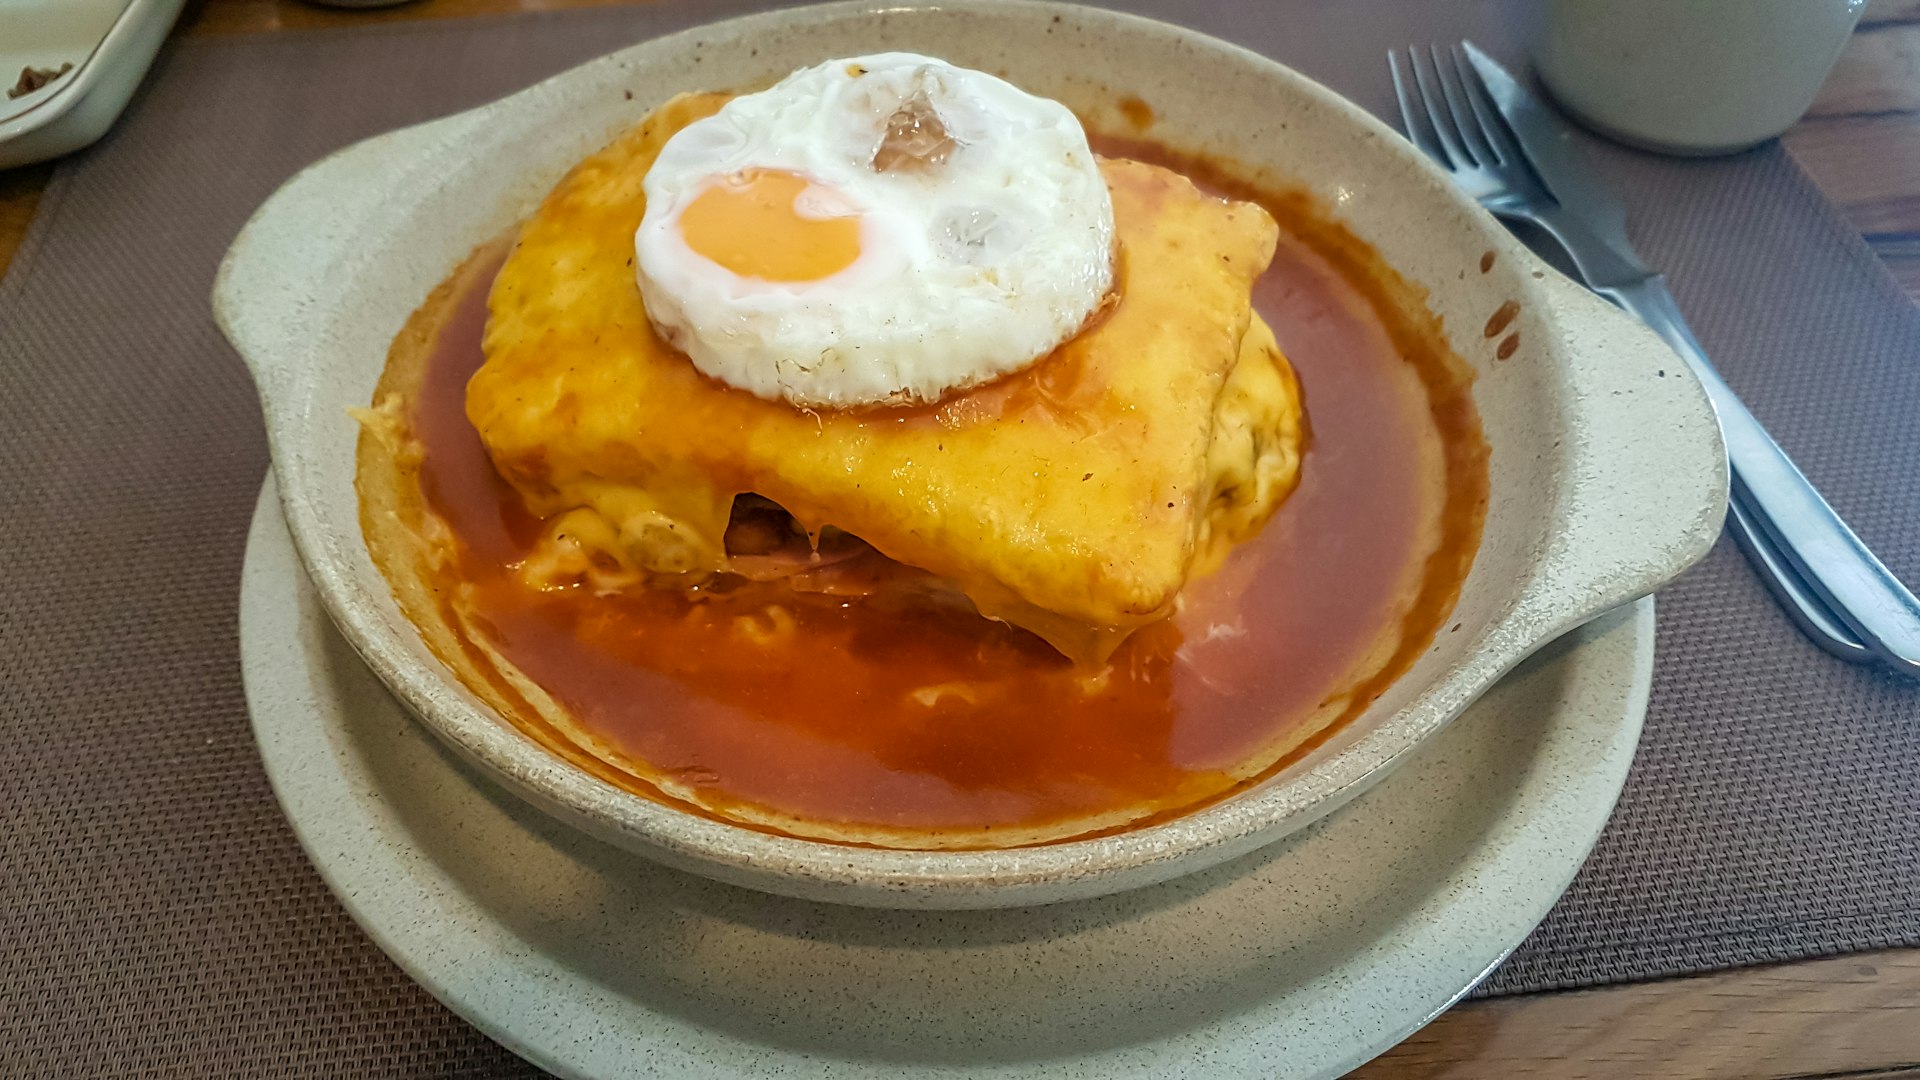 Francesinha (meaning Little Frenchie or simply Frenchie in Portuguese) is a Portuguese sandwich originally from Porto